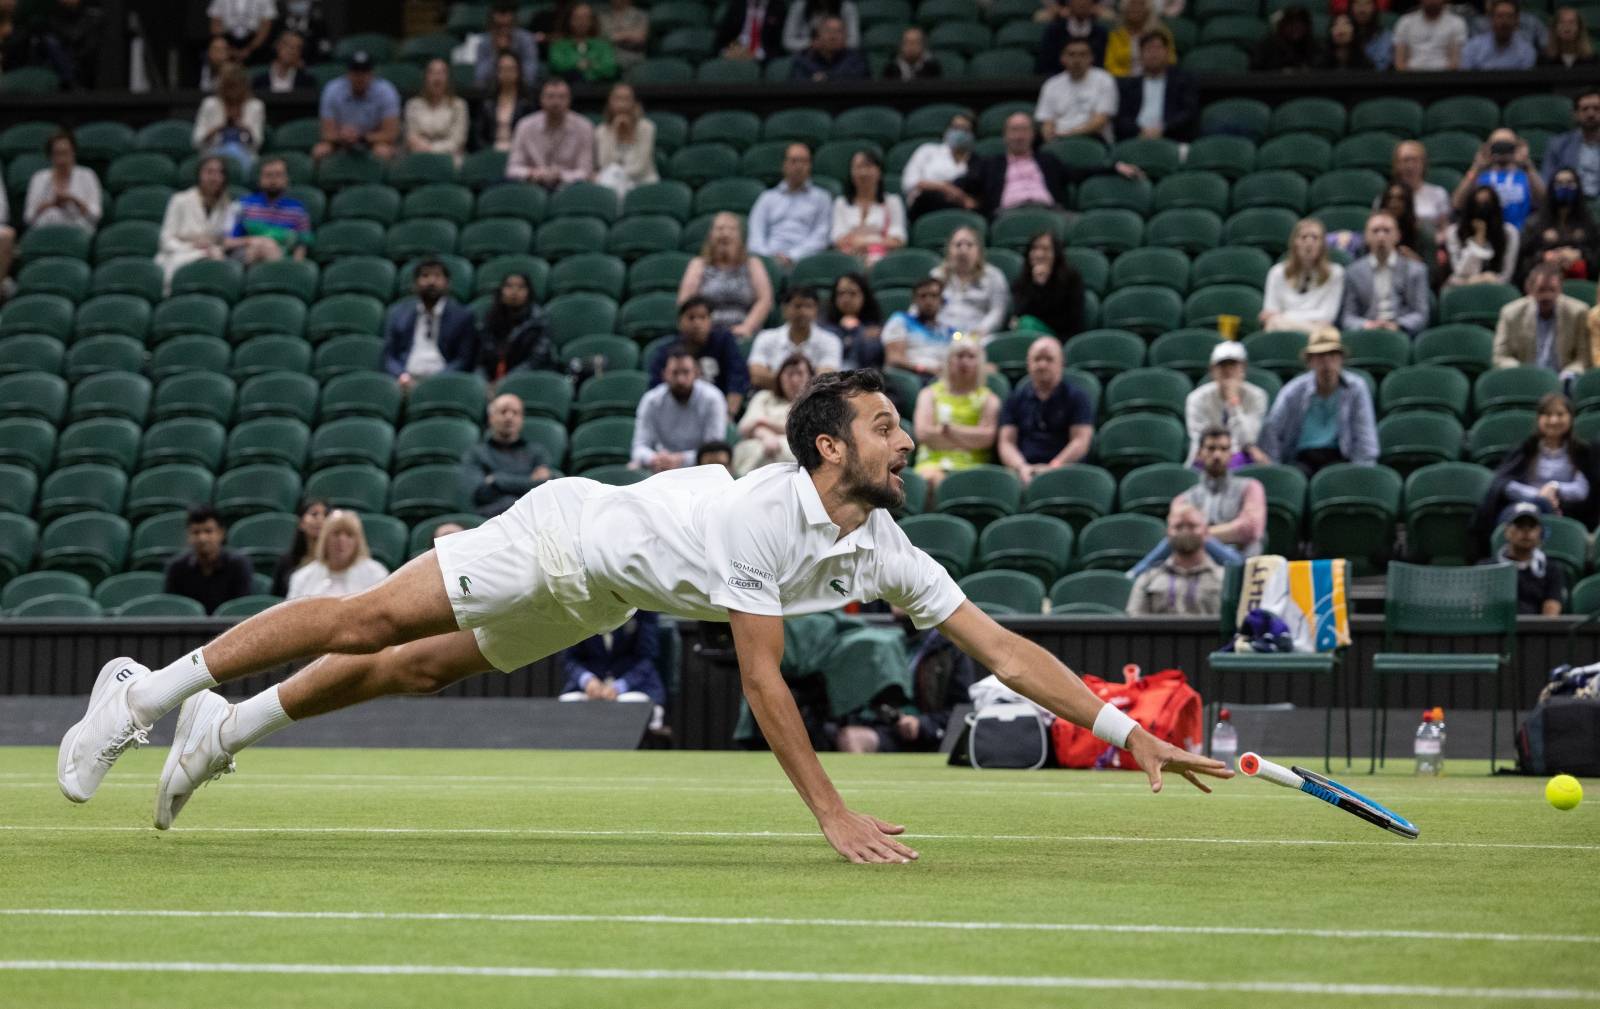 Wimbledon 2021 - Day Twelve - The All England Lawn Tennis and Croquet Club